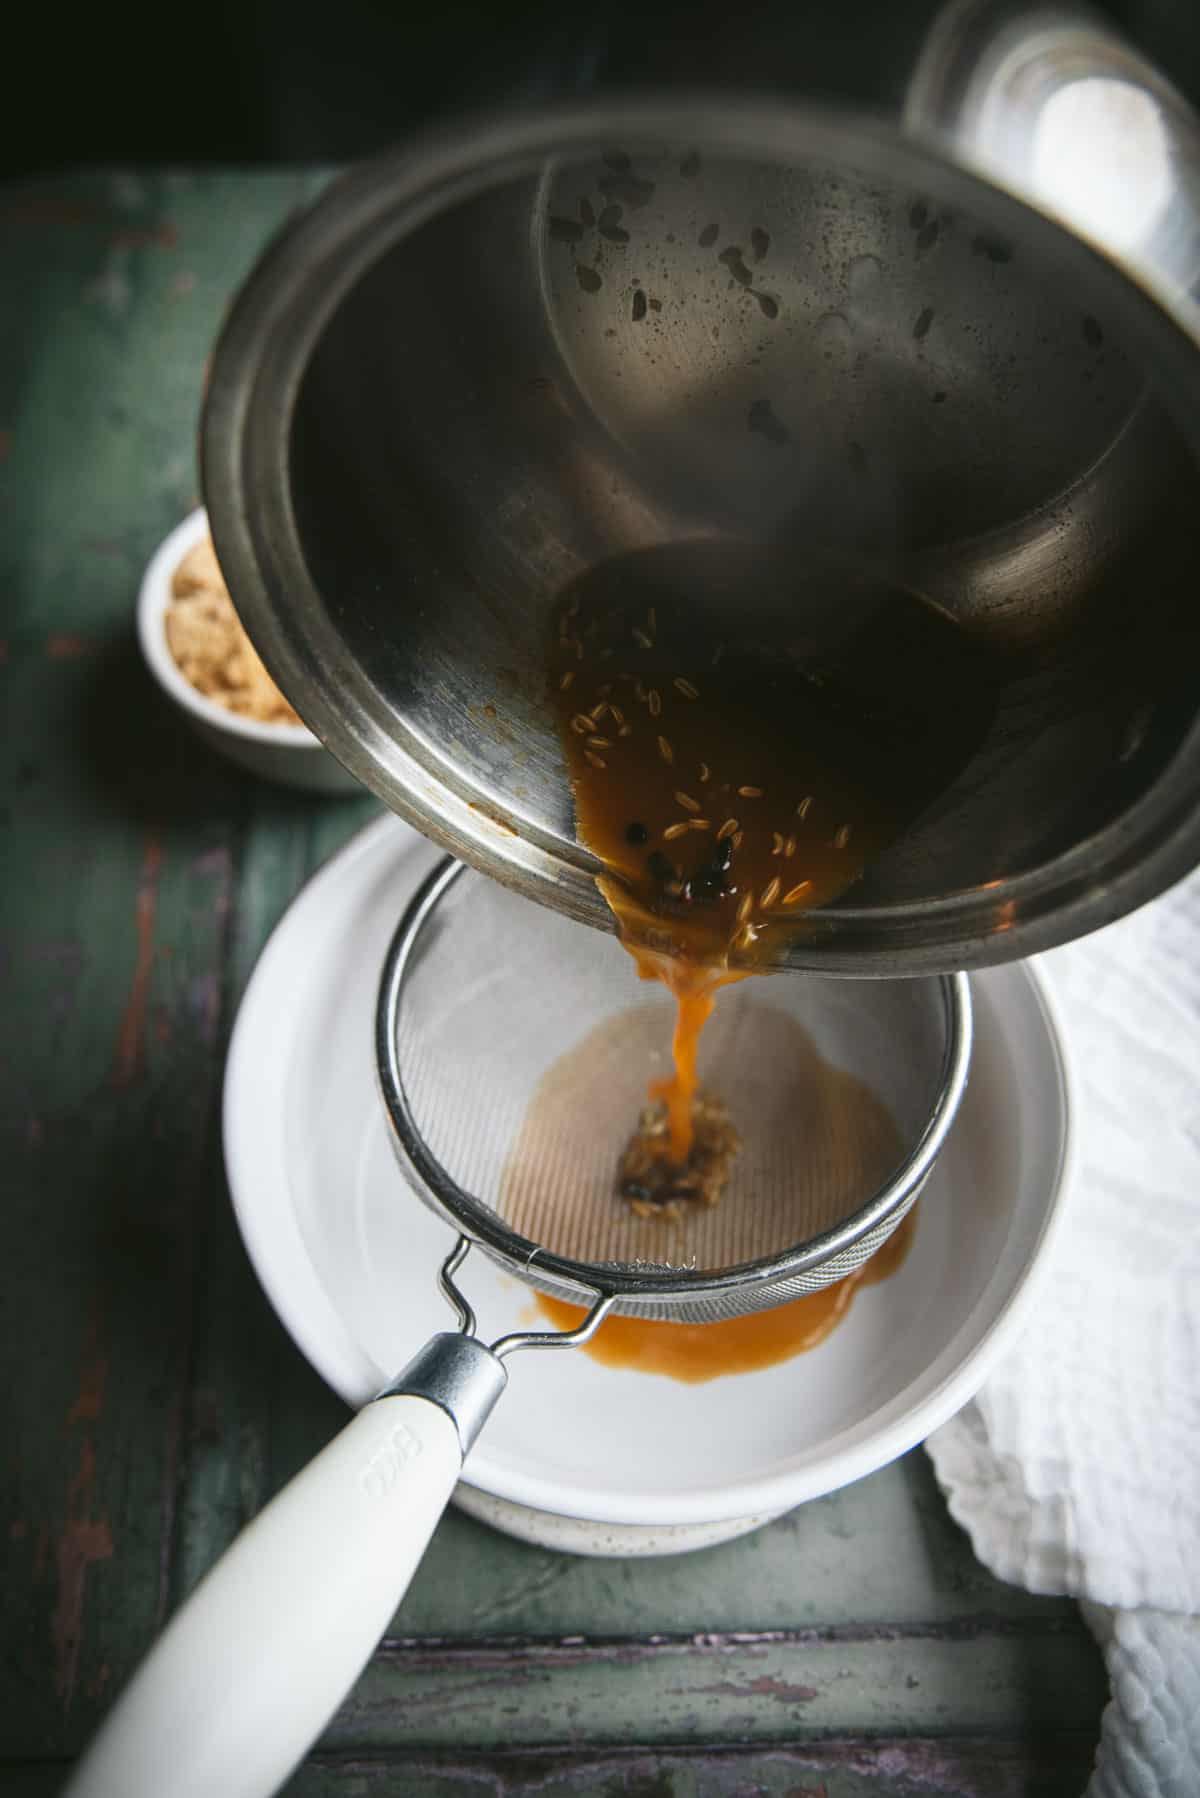 The liquid spice mixture is being poured from the silver pot, through a metal strainer and the liquid is being collected in a white ceramic pot underneath.